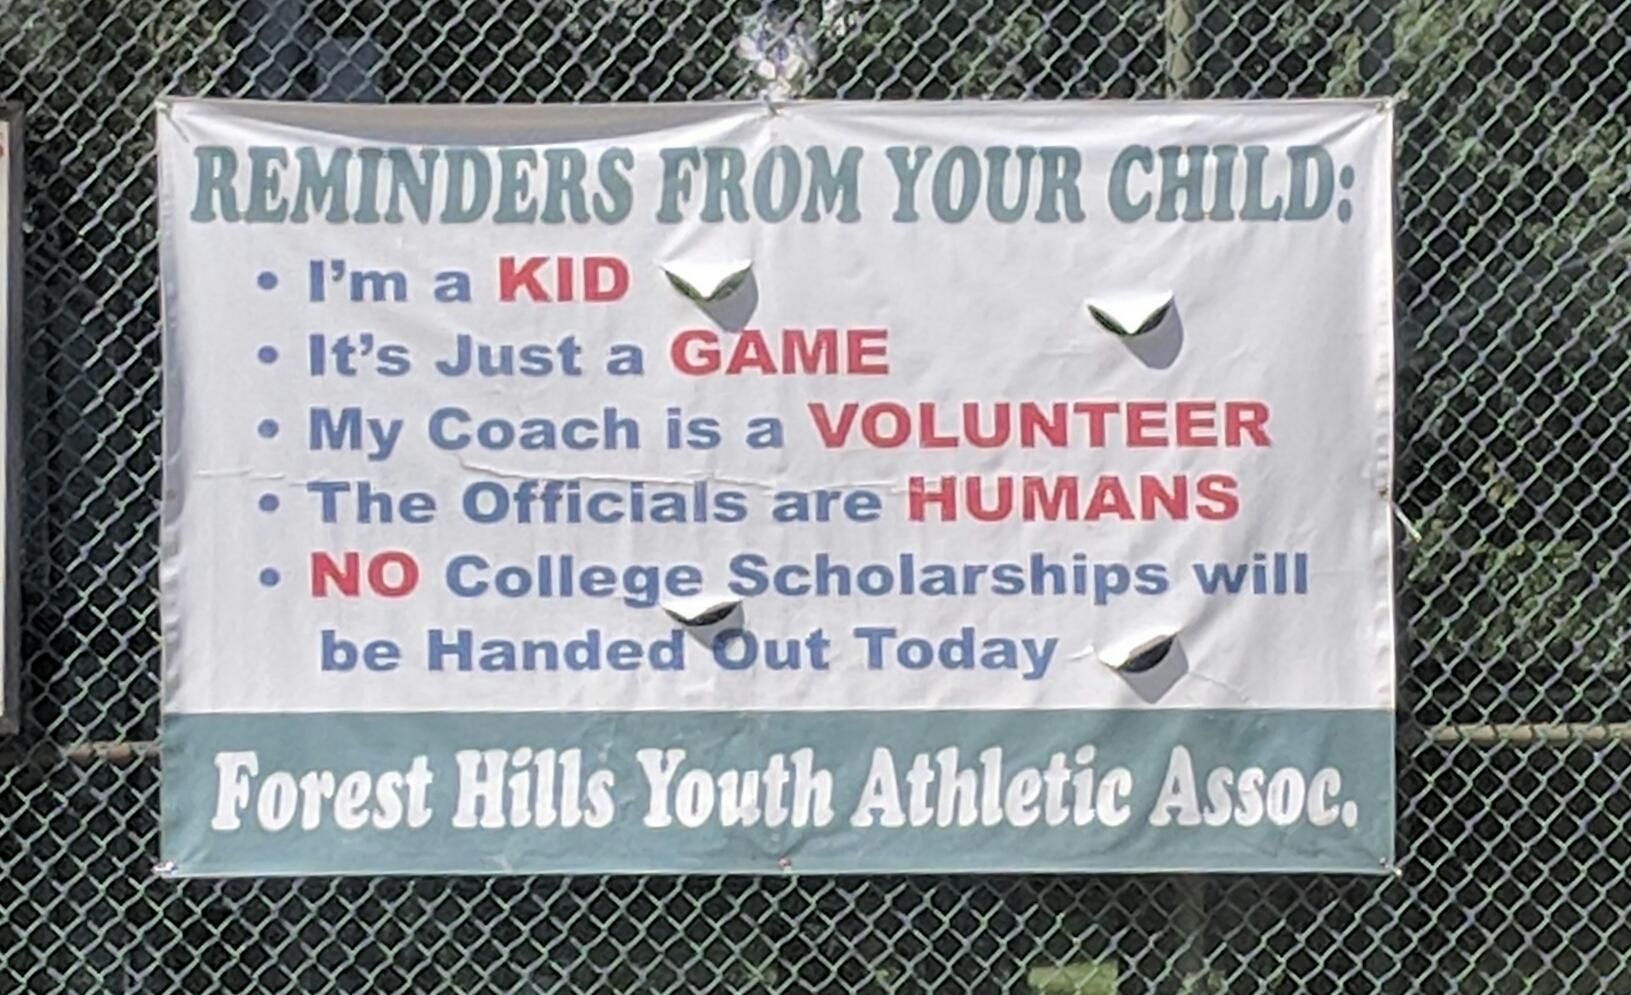 This awesome sign at a local little league field